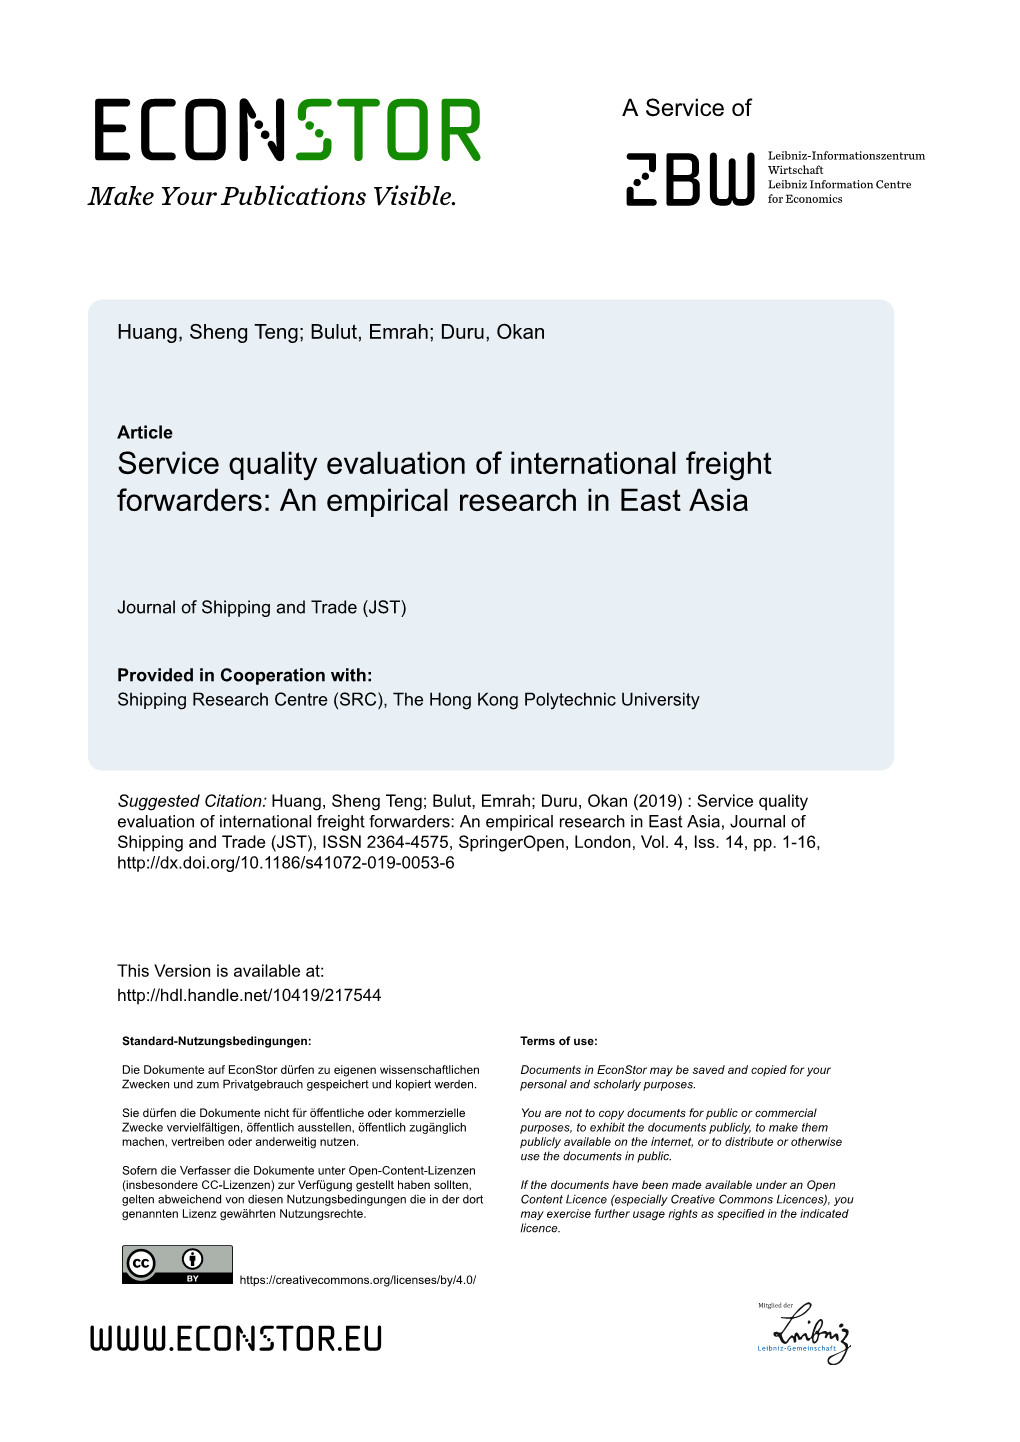 Service Quality Evaluation of International Freight Forwarders: an Empirical Research in East Asia